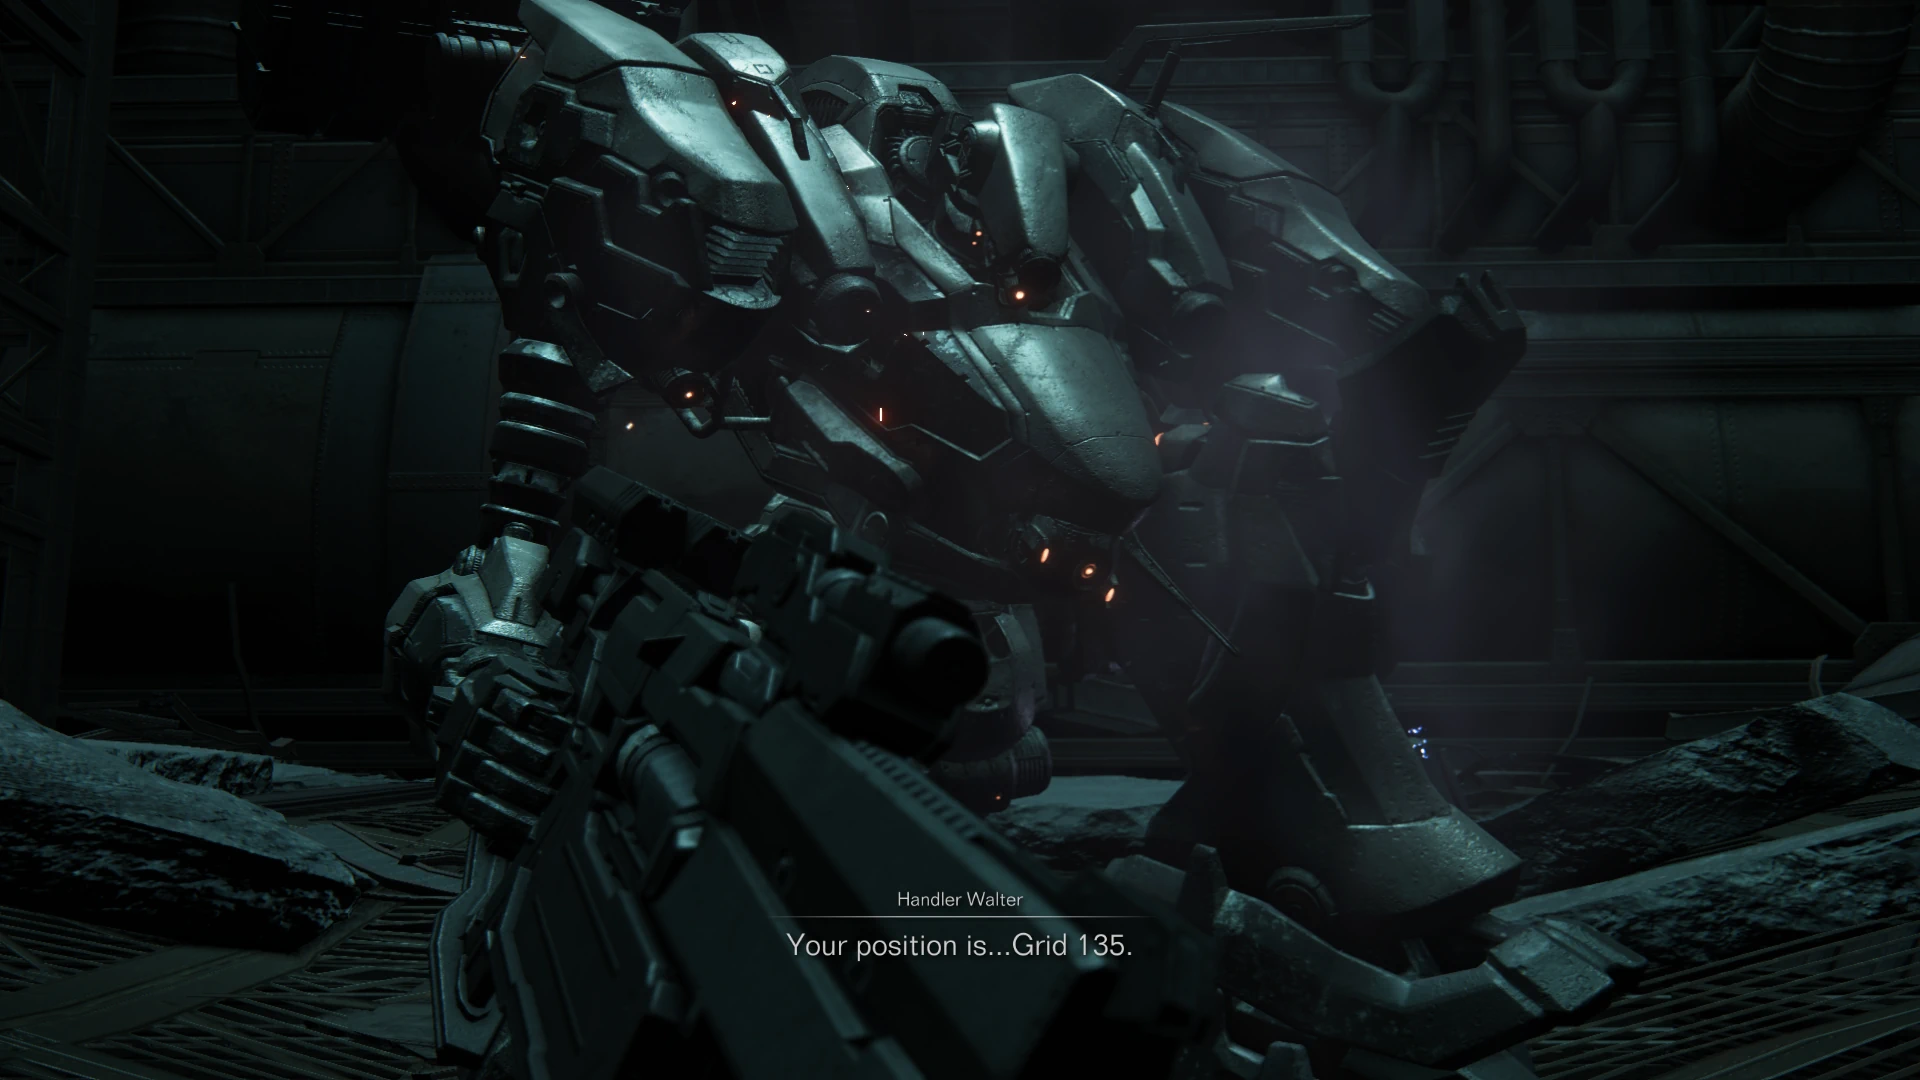 The player's starting AC touches down in the opening cutscene.